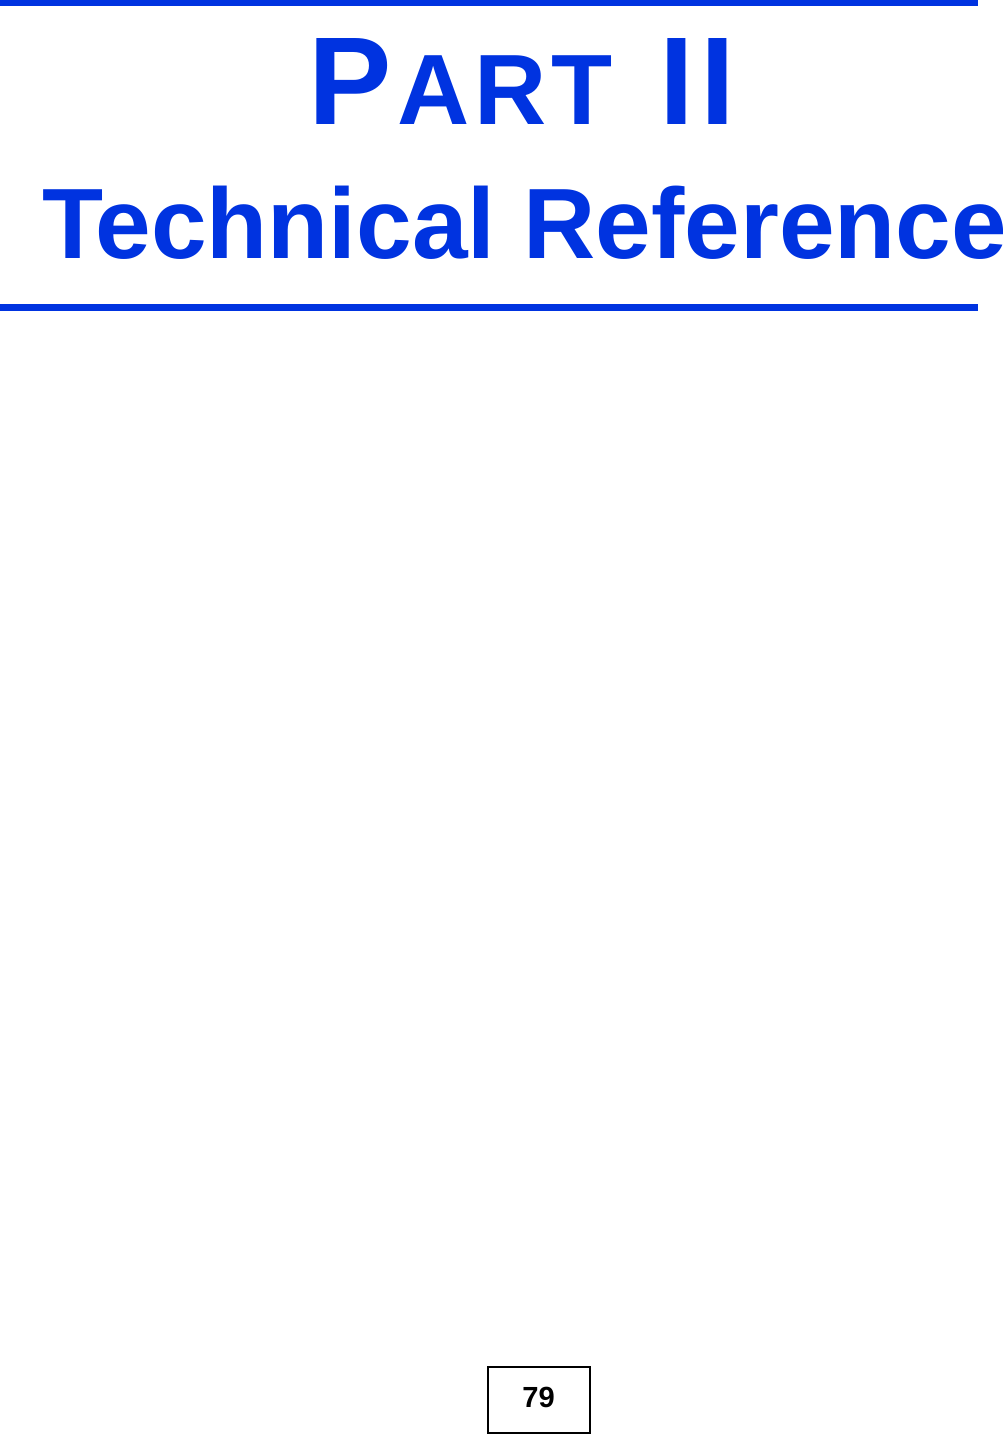 79PART IITechnical Reference